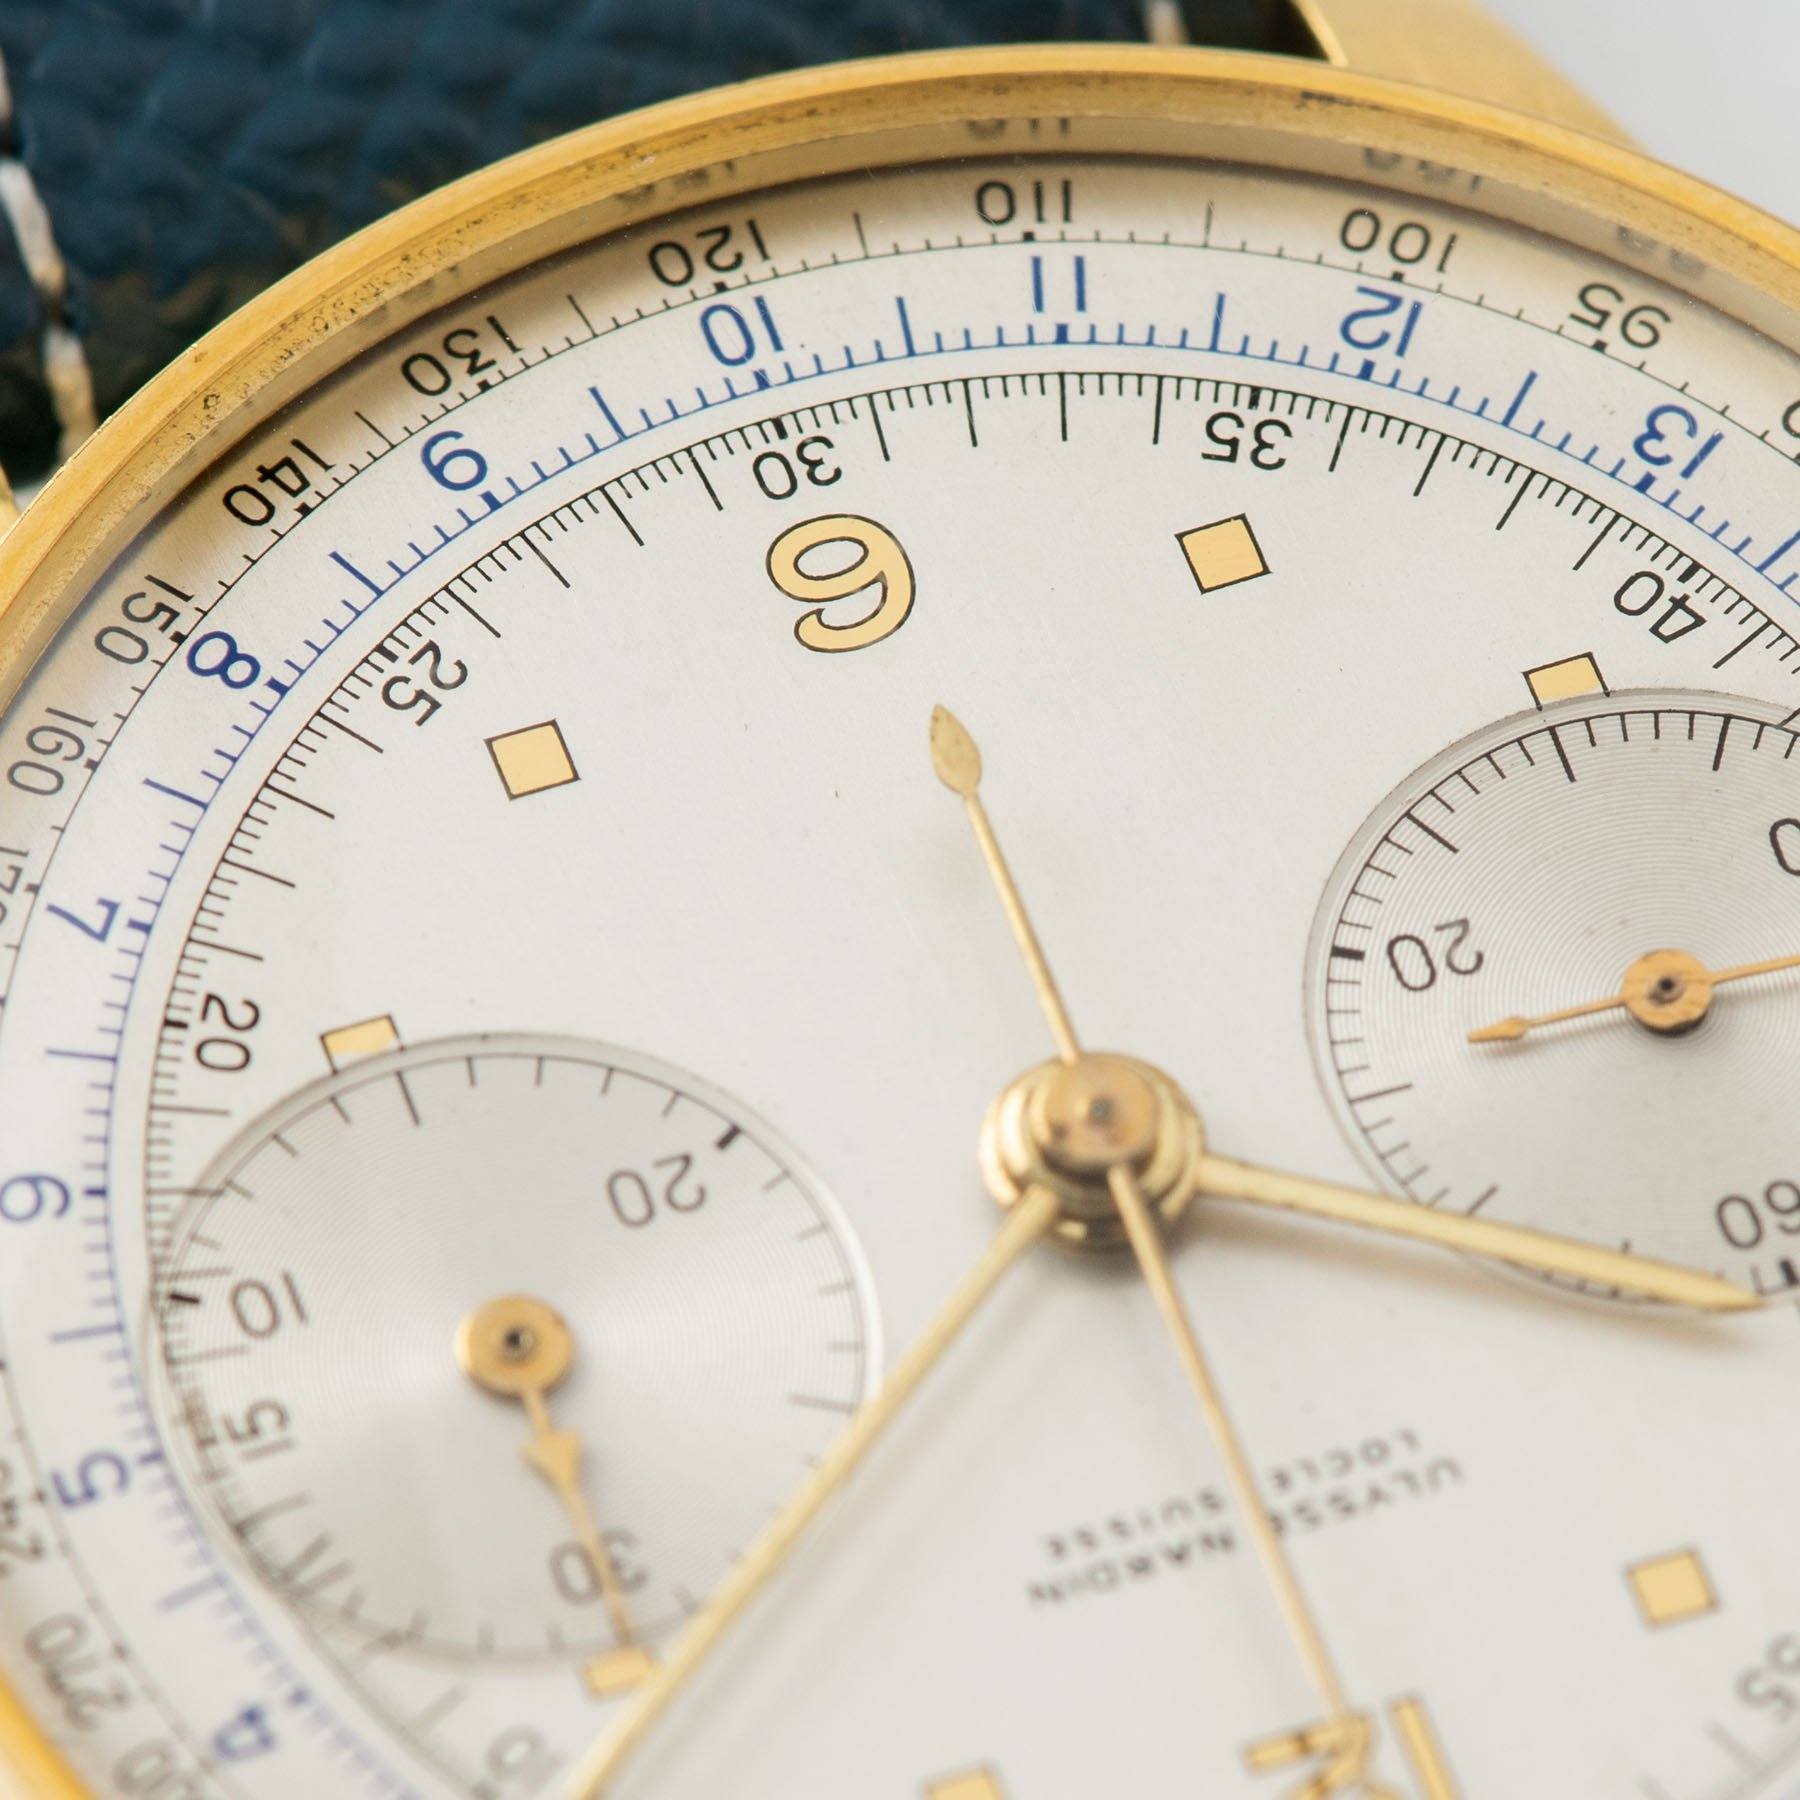 Ulysse Nardin Yellow Gold Mono Pusher Chronograph in 18 yellow gold with a black tachymeter scale